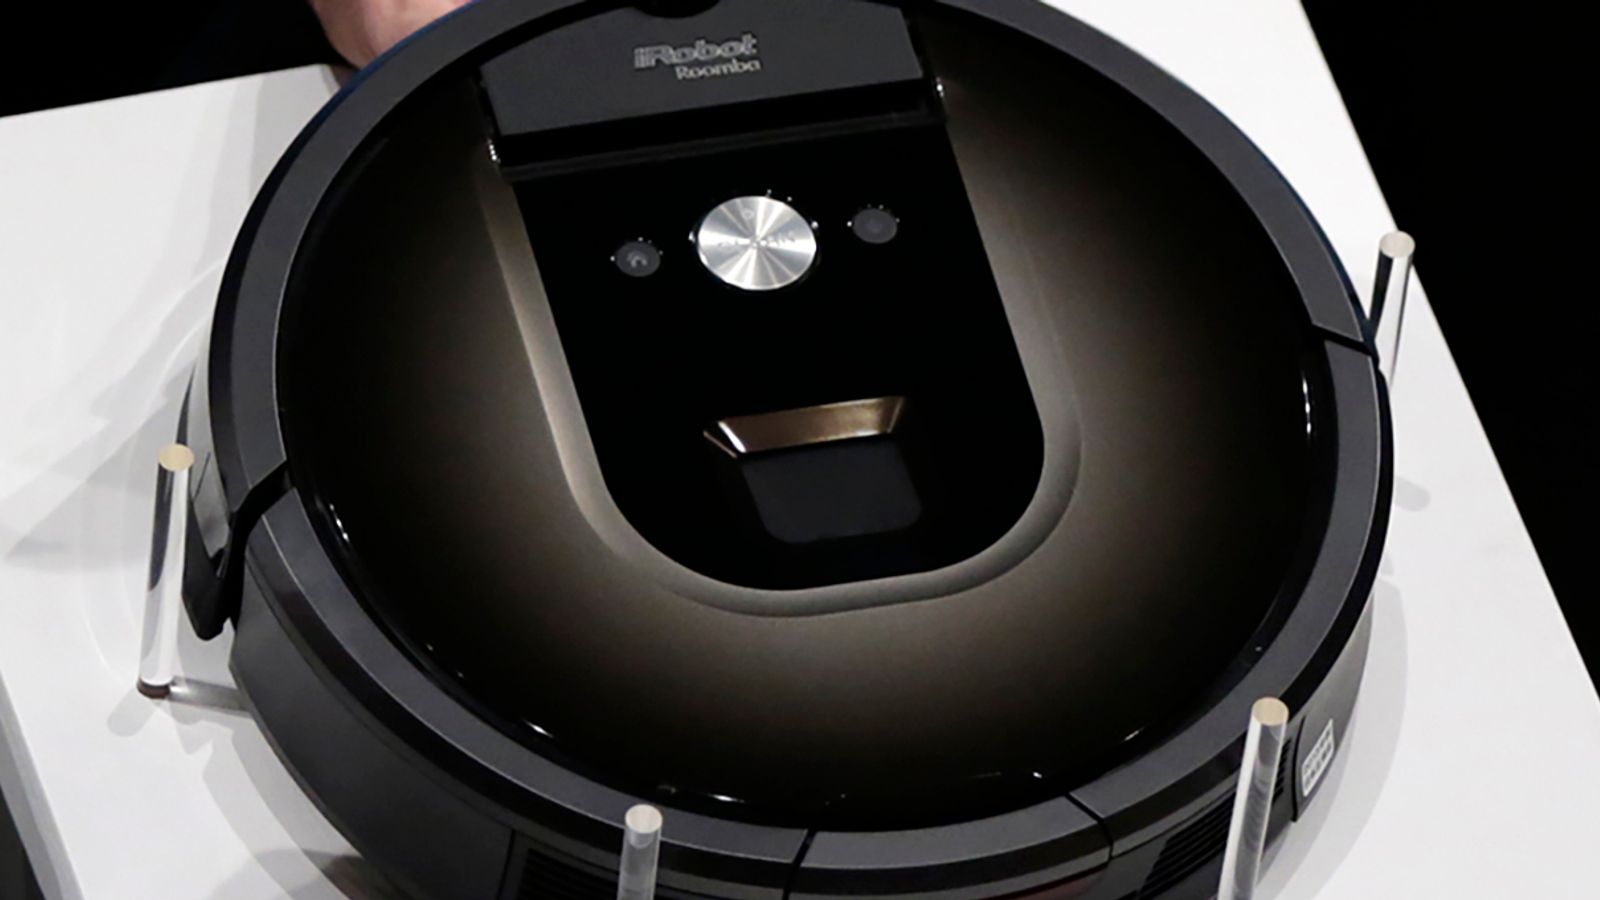 Merger between Amazon and Roomba maker iRobot abandoned over competition concerns